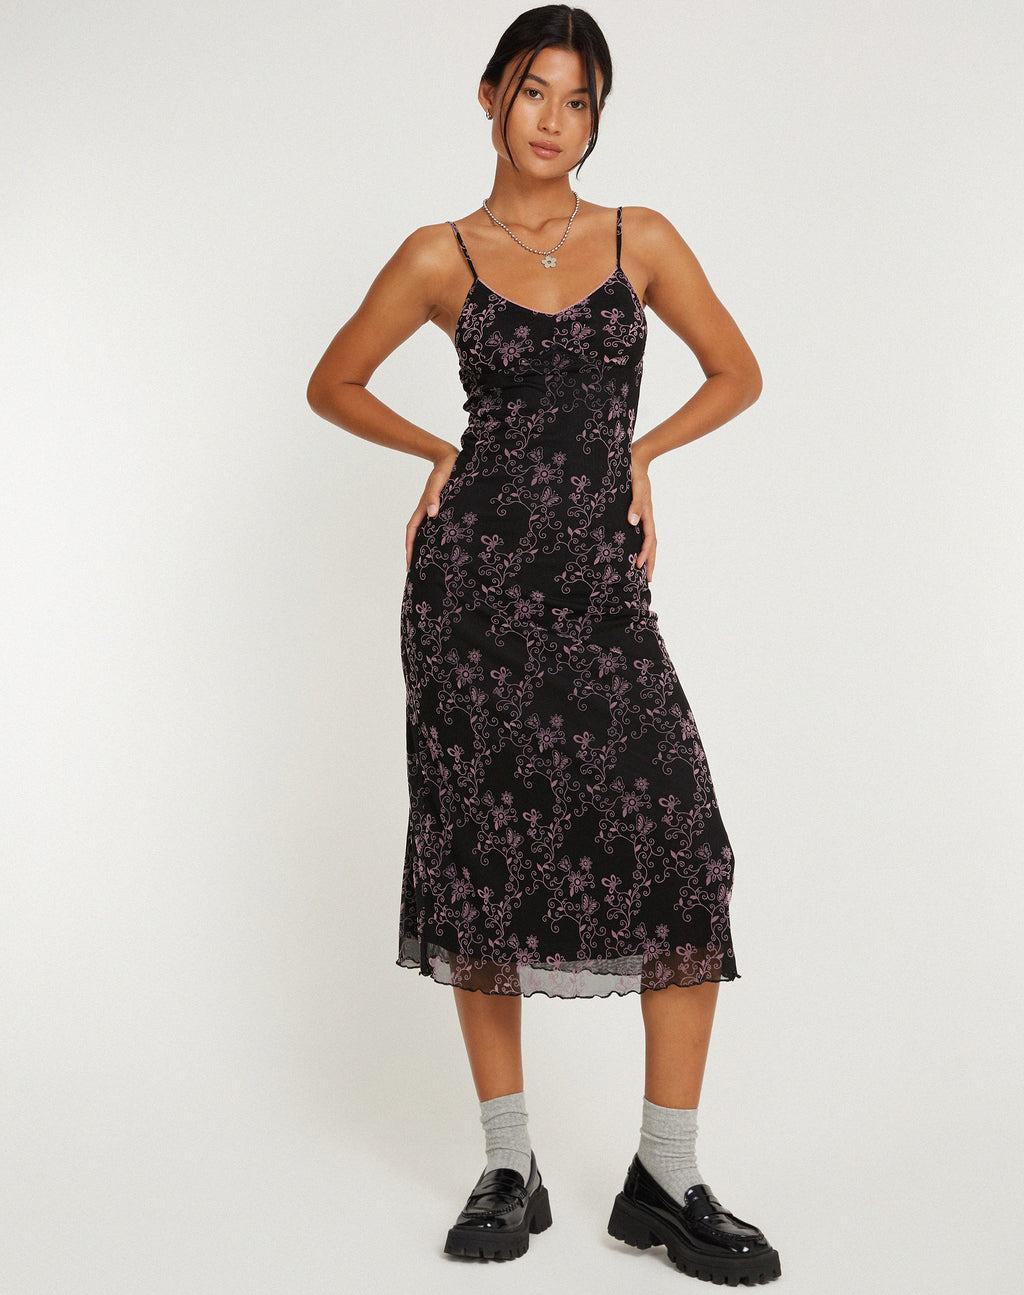 Cotina Midi Dress in Butterfly Vine Flock Black and Pink